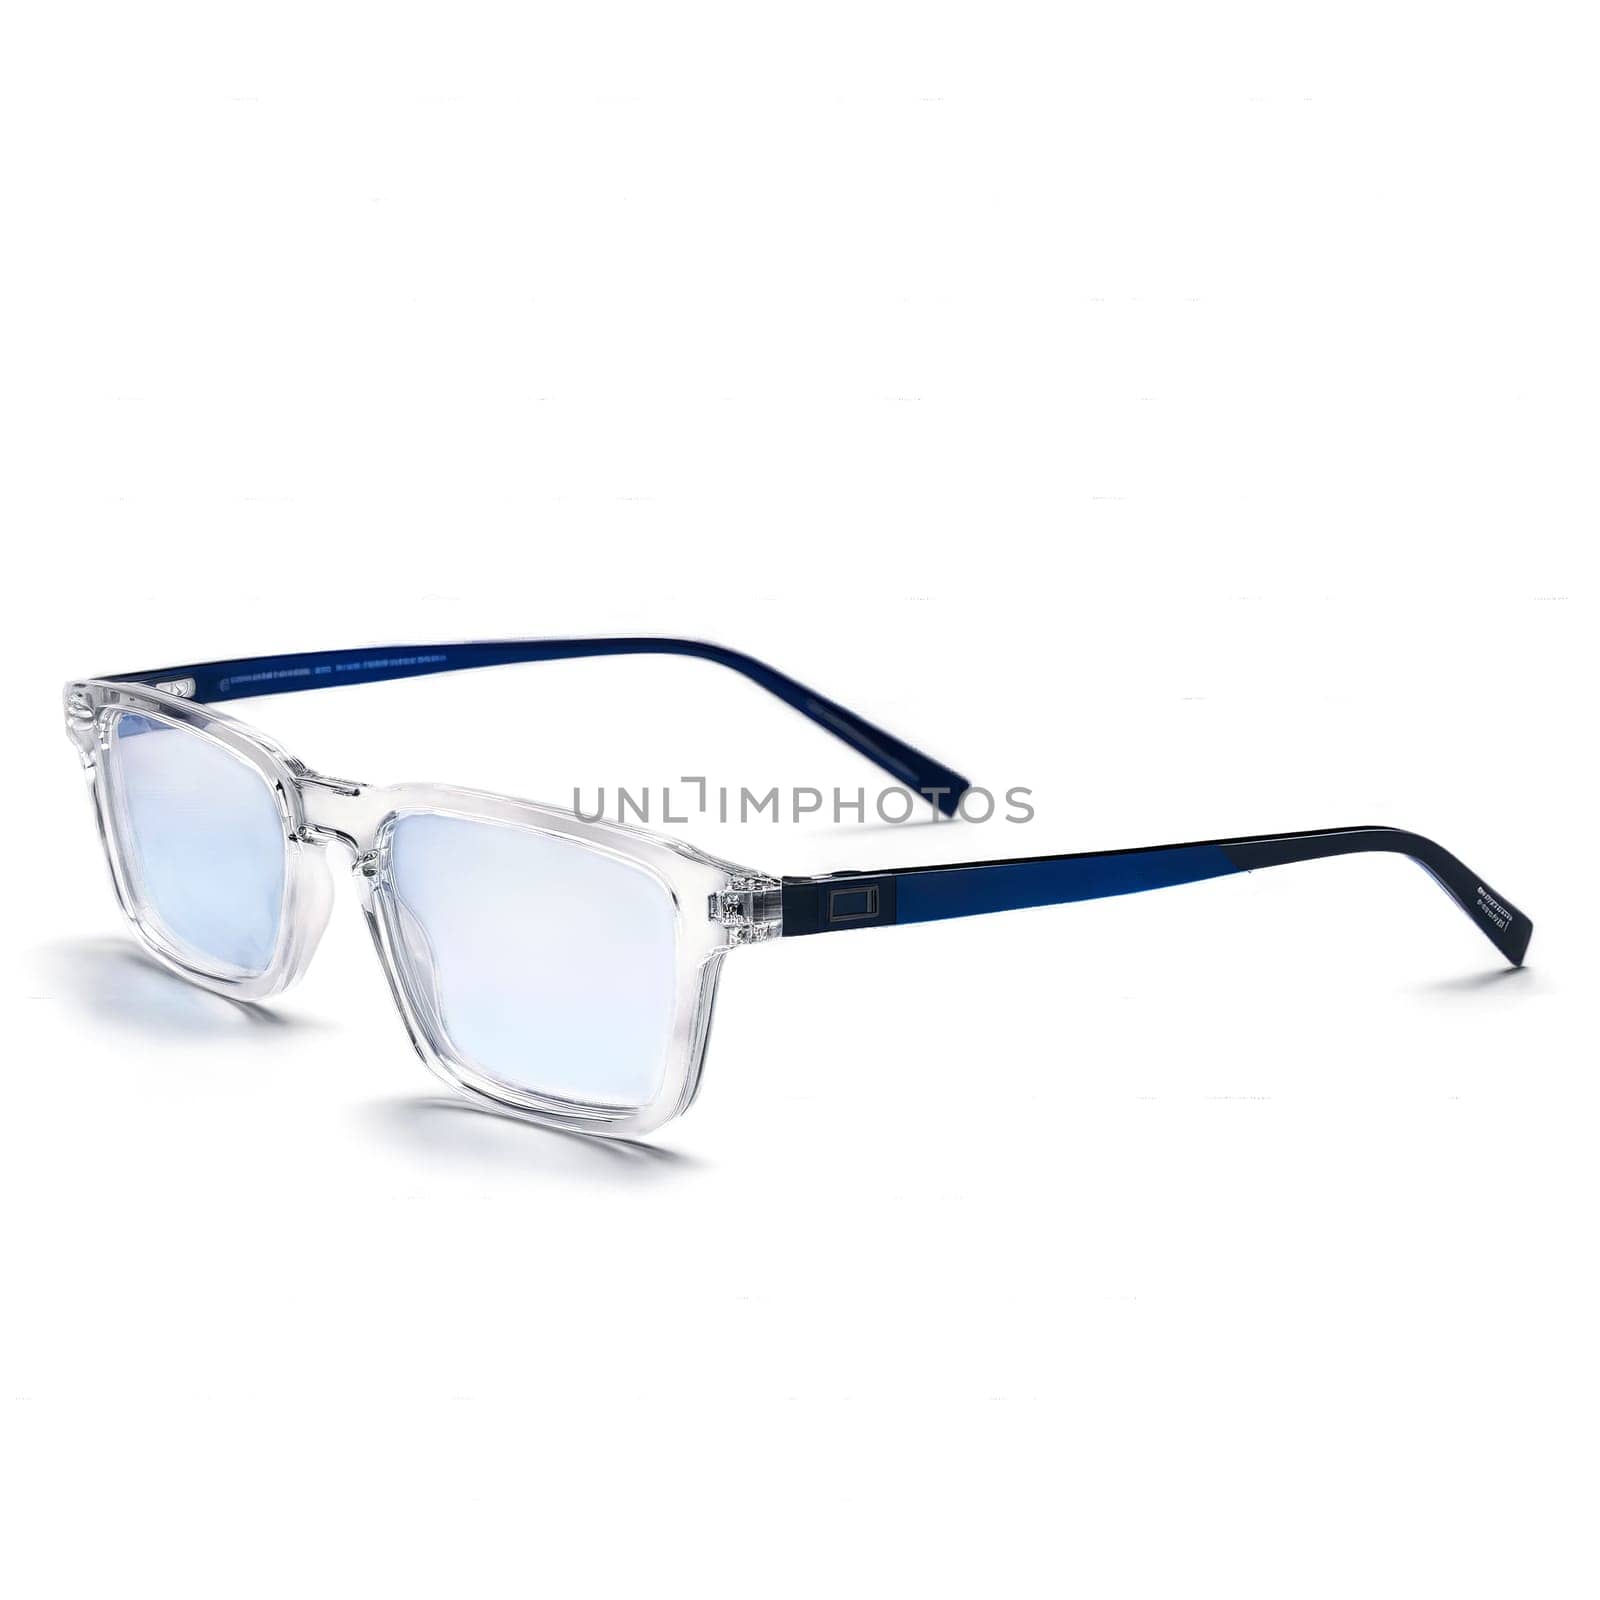 Rectangular glasses with transparent gray acetate frames and blue light filtering lenses providing a modern. Product isolated on transparent background